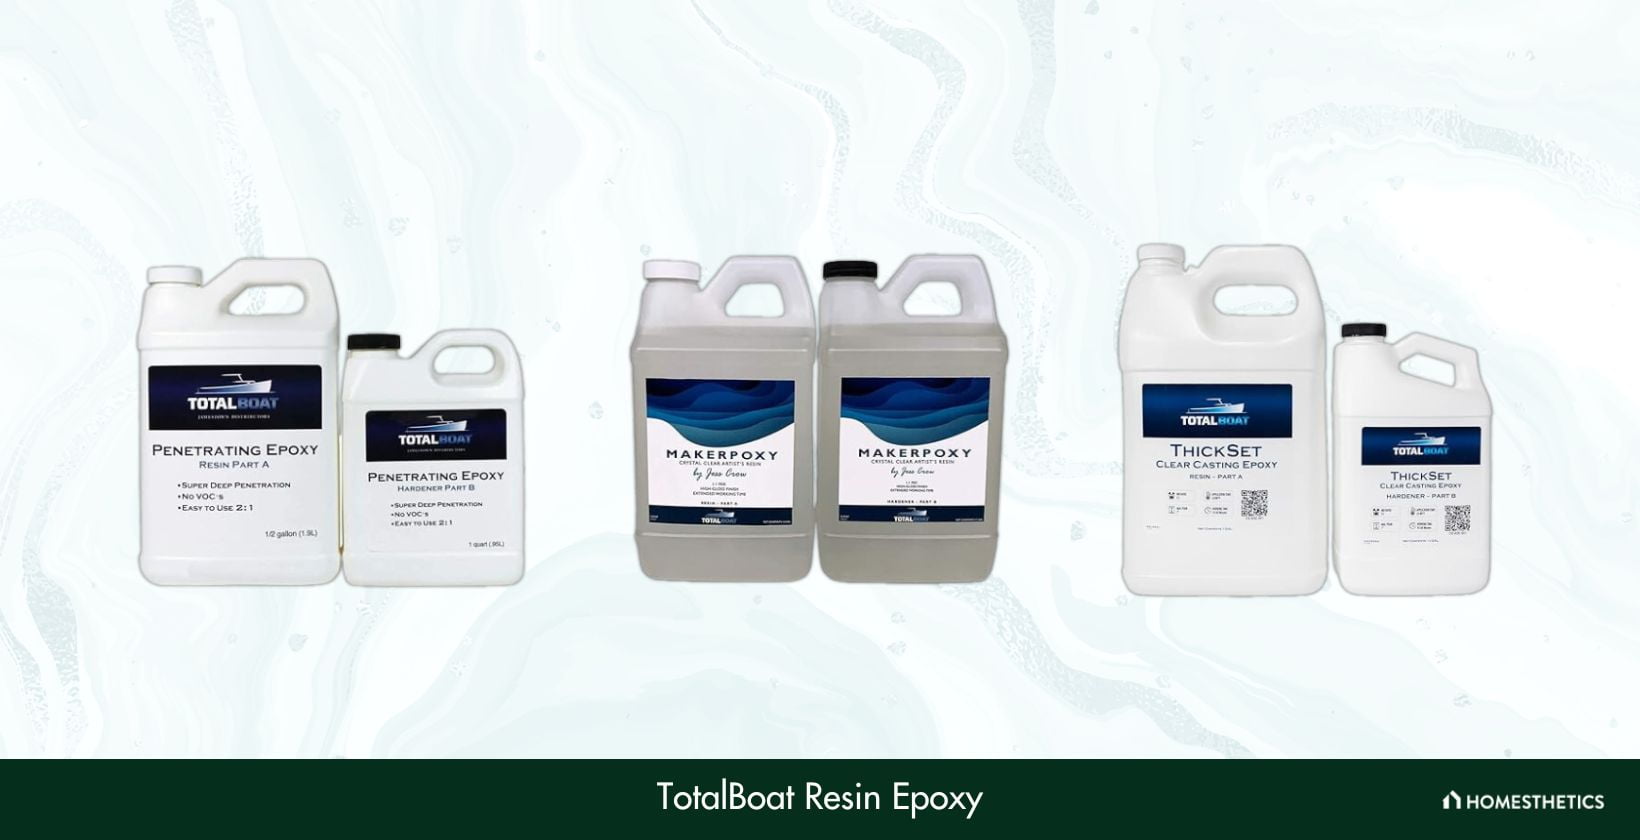 TotalBoat Table Top Epoxy Resin 1 Gallon Kit - Crystal Clear Coating A